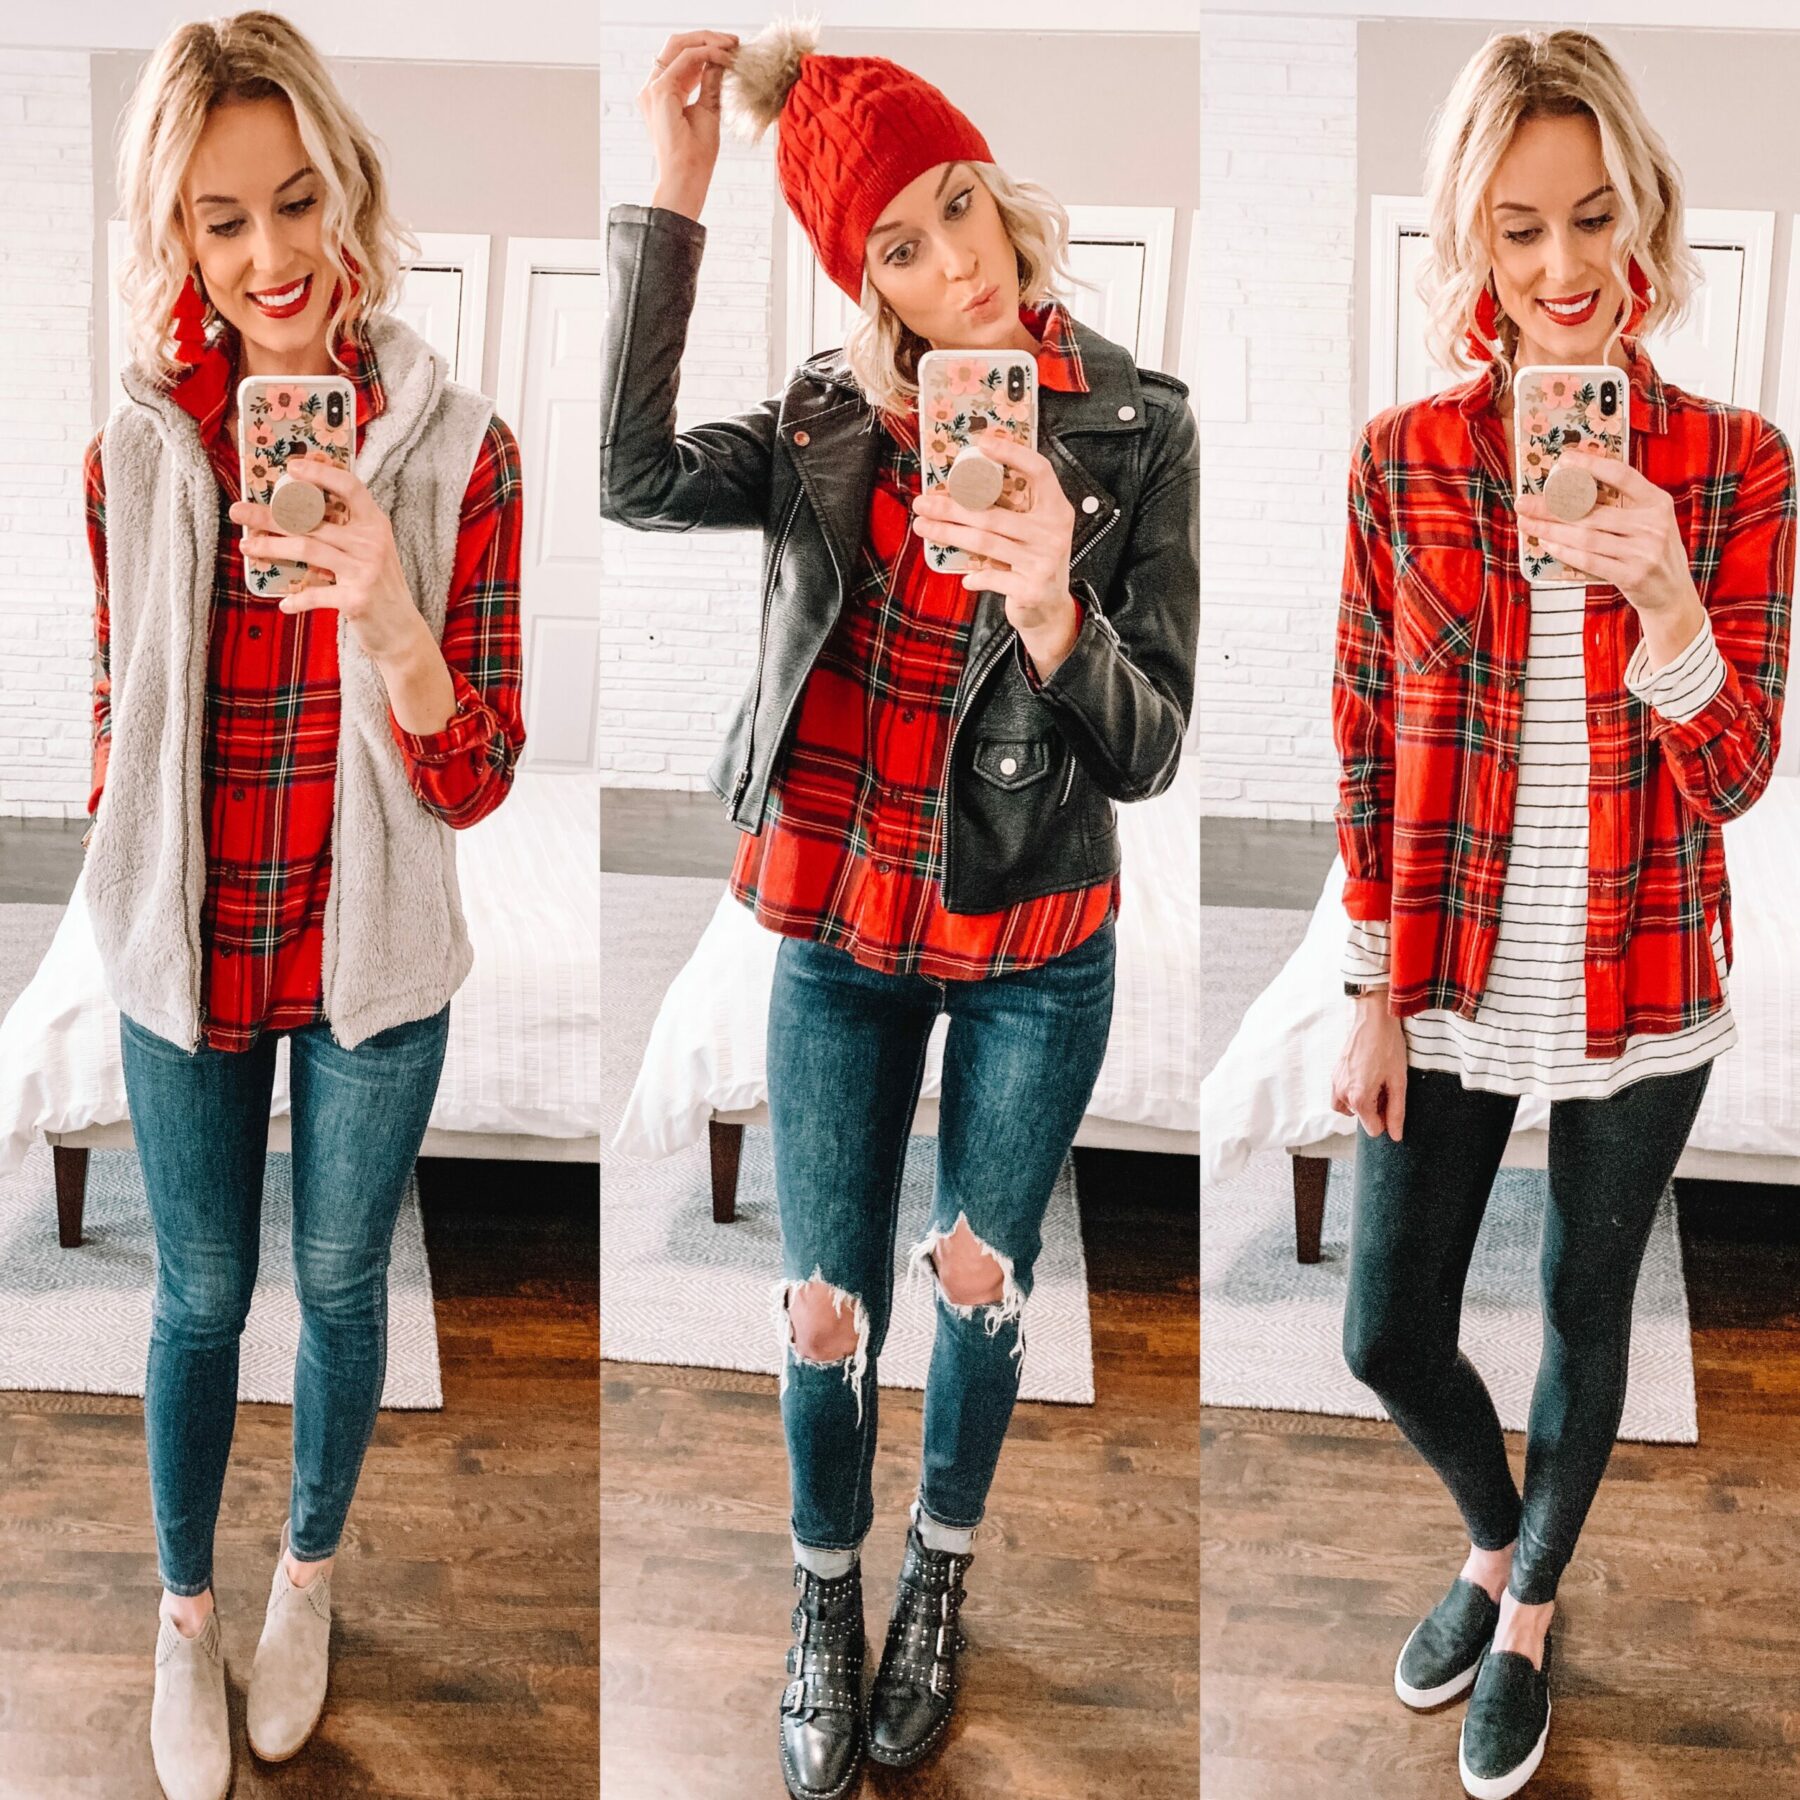 3 Ways to Wear a Flannel Shirt - Straight A Style